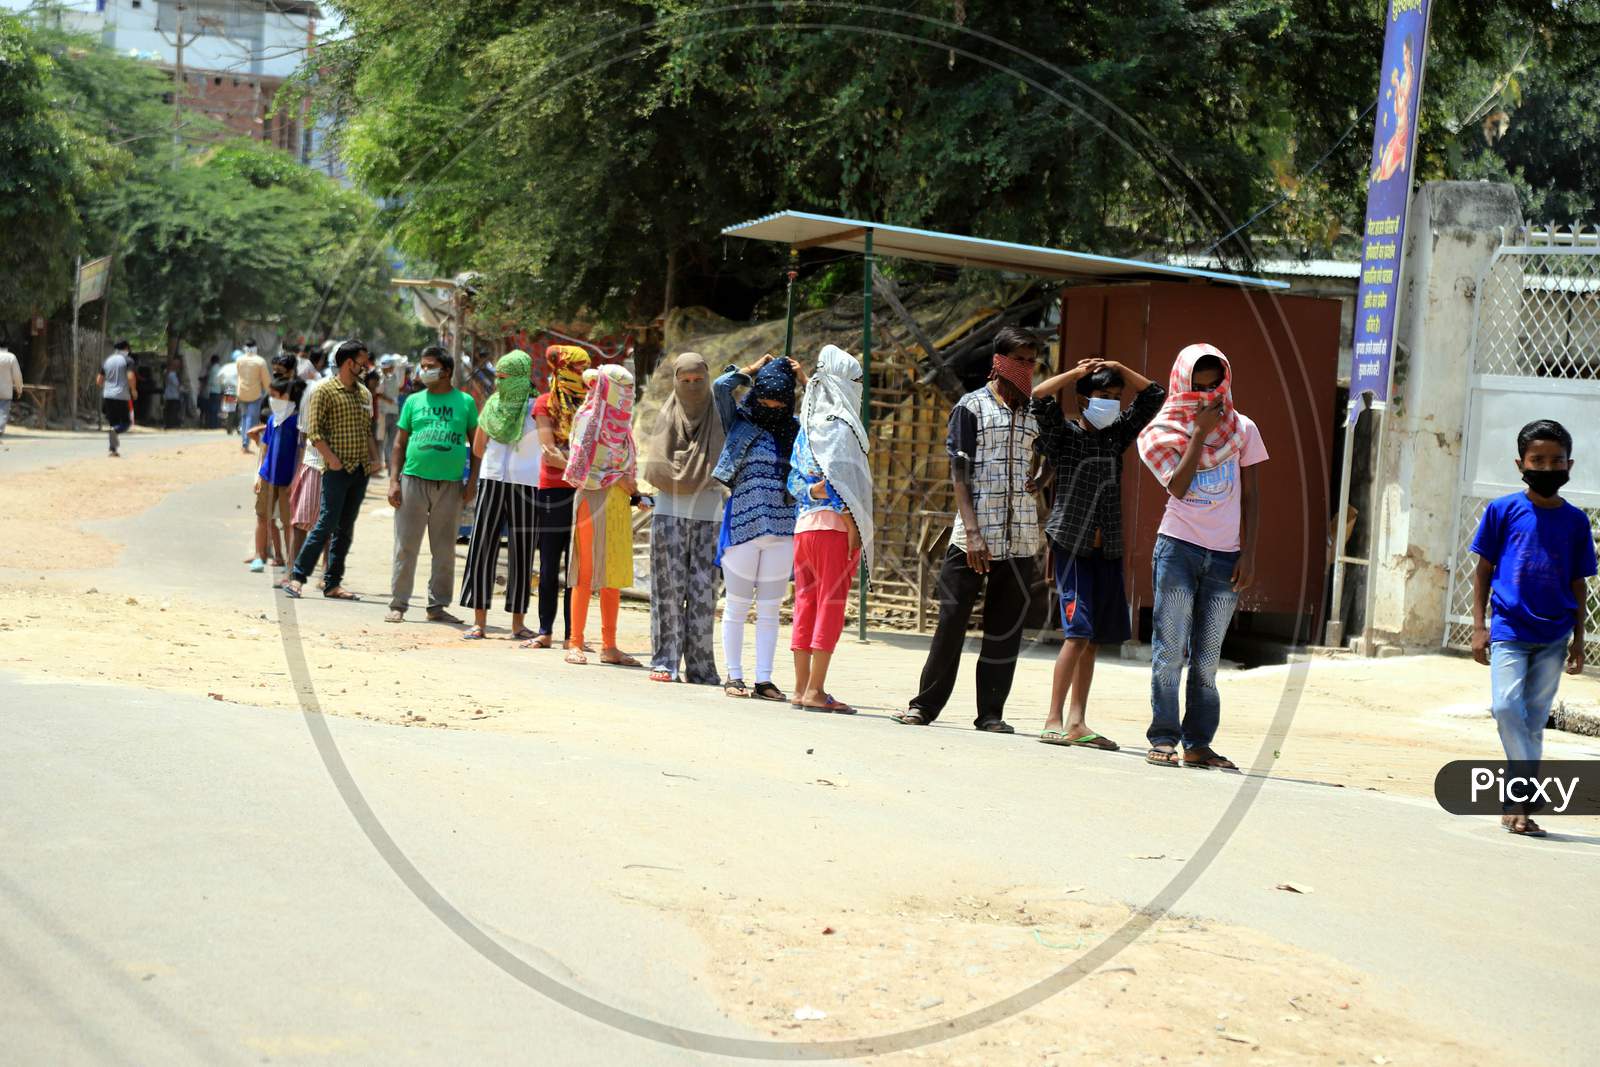 People Queue To Get Free Food Packets During A Government-Imposed Nationwide Lockdown As A Preventive Measure Against The Spread Of The Covid-19 Coronavirus In Prayagraj, April, 11, 2020.